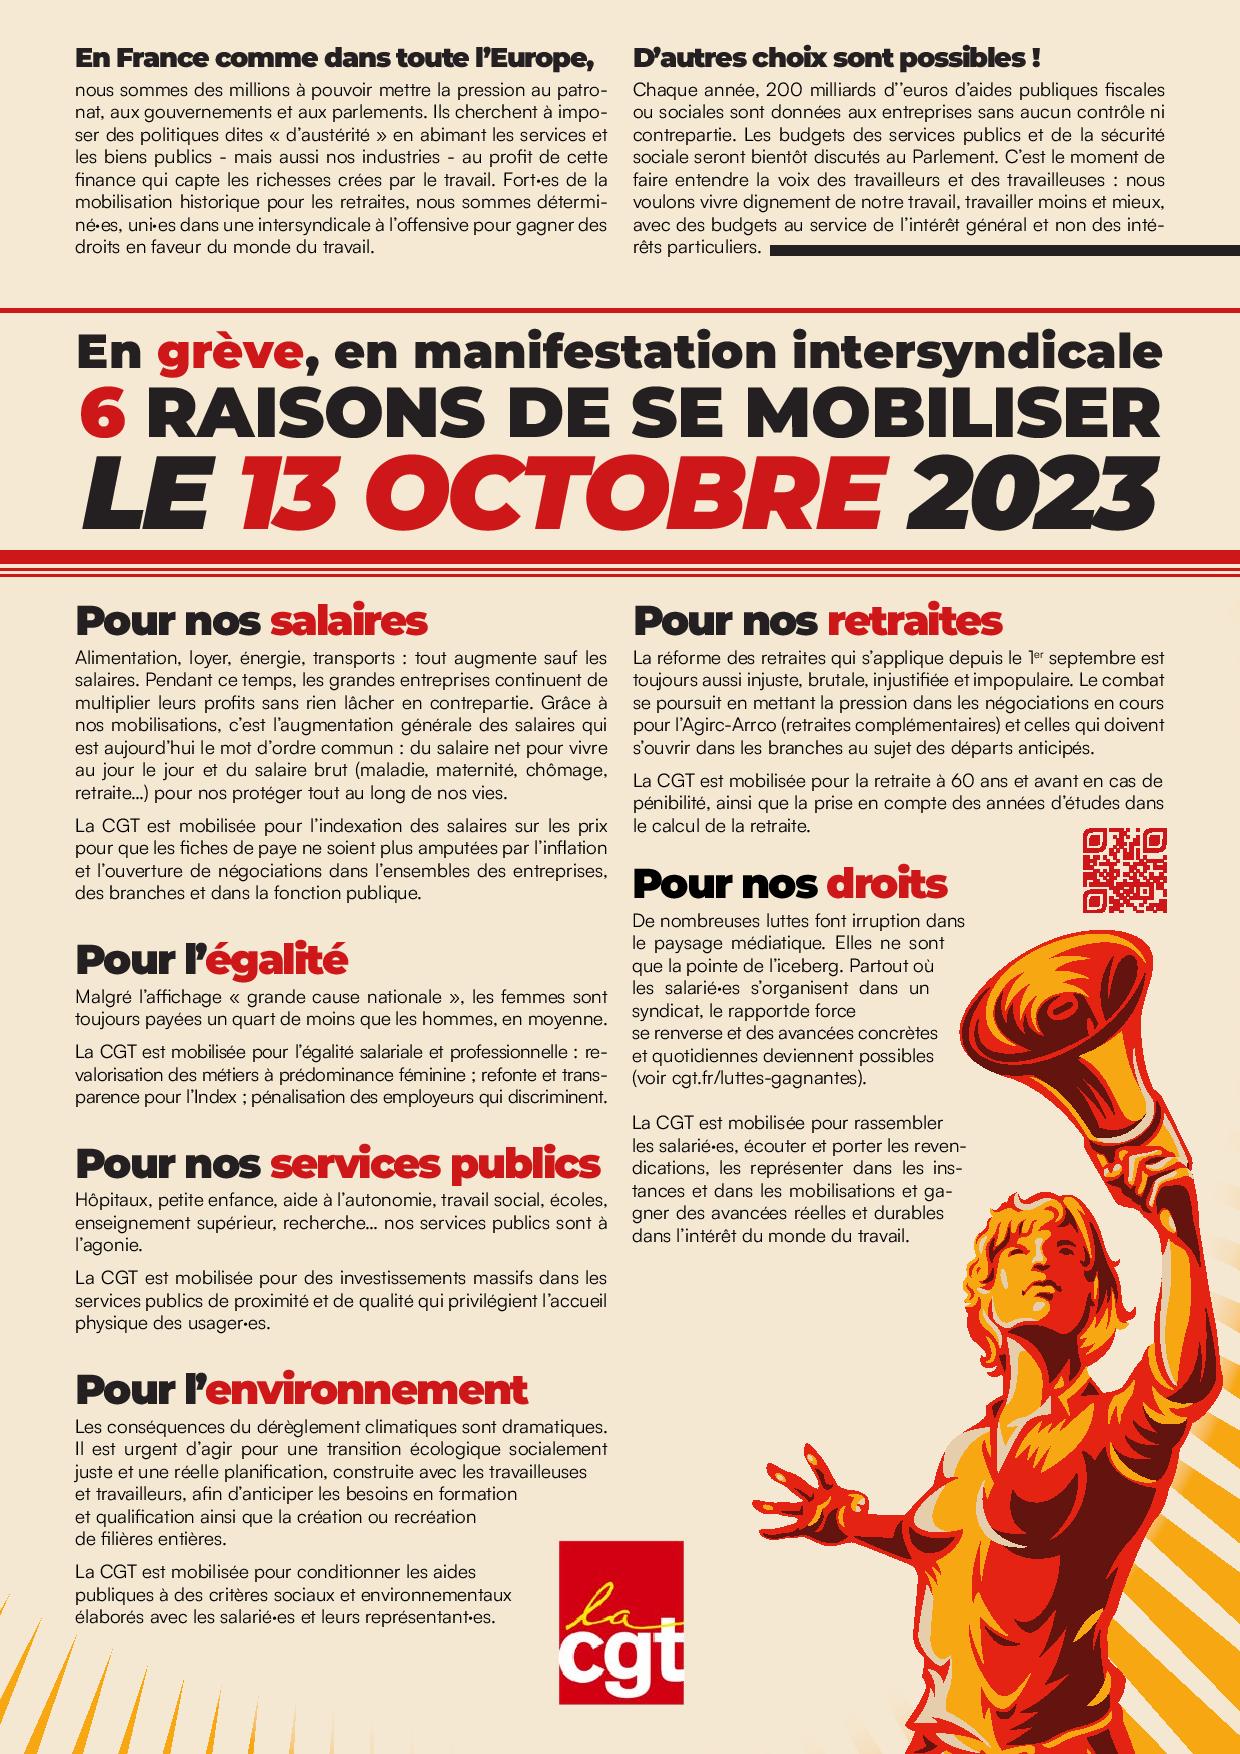 TRACT 13 OCTOBRE 2023(1)-page-001.jpg